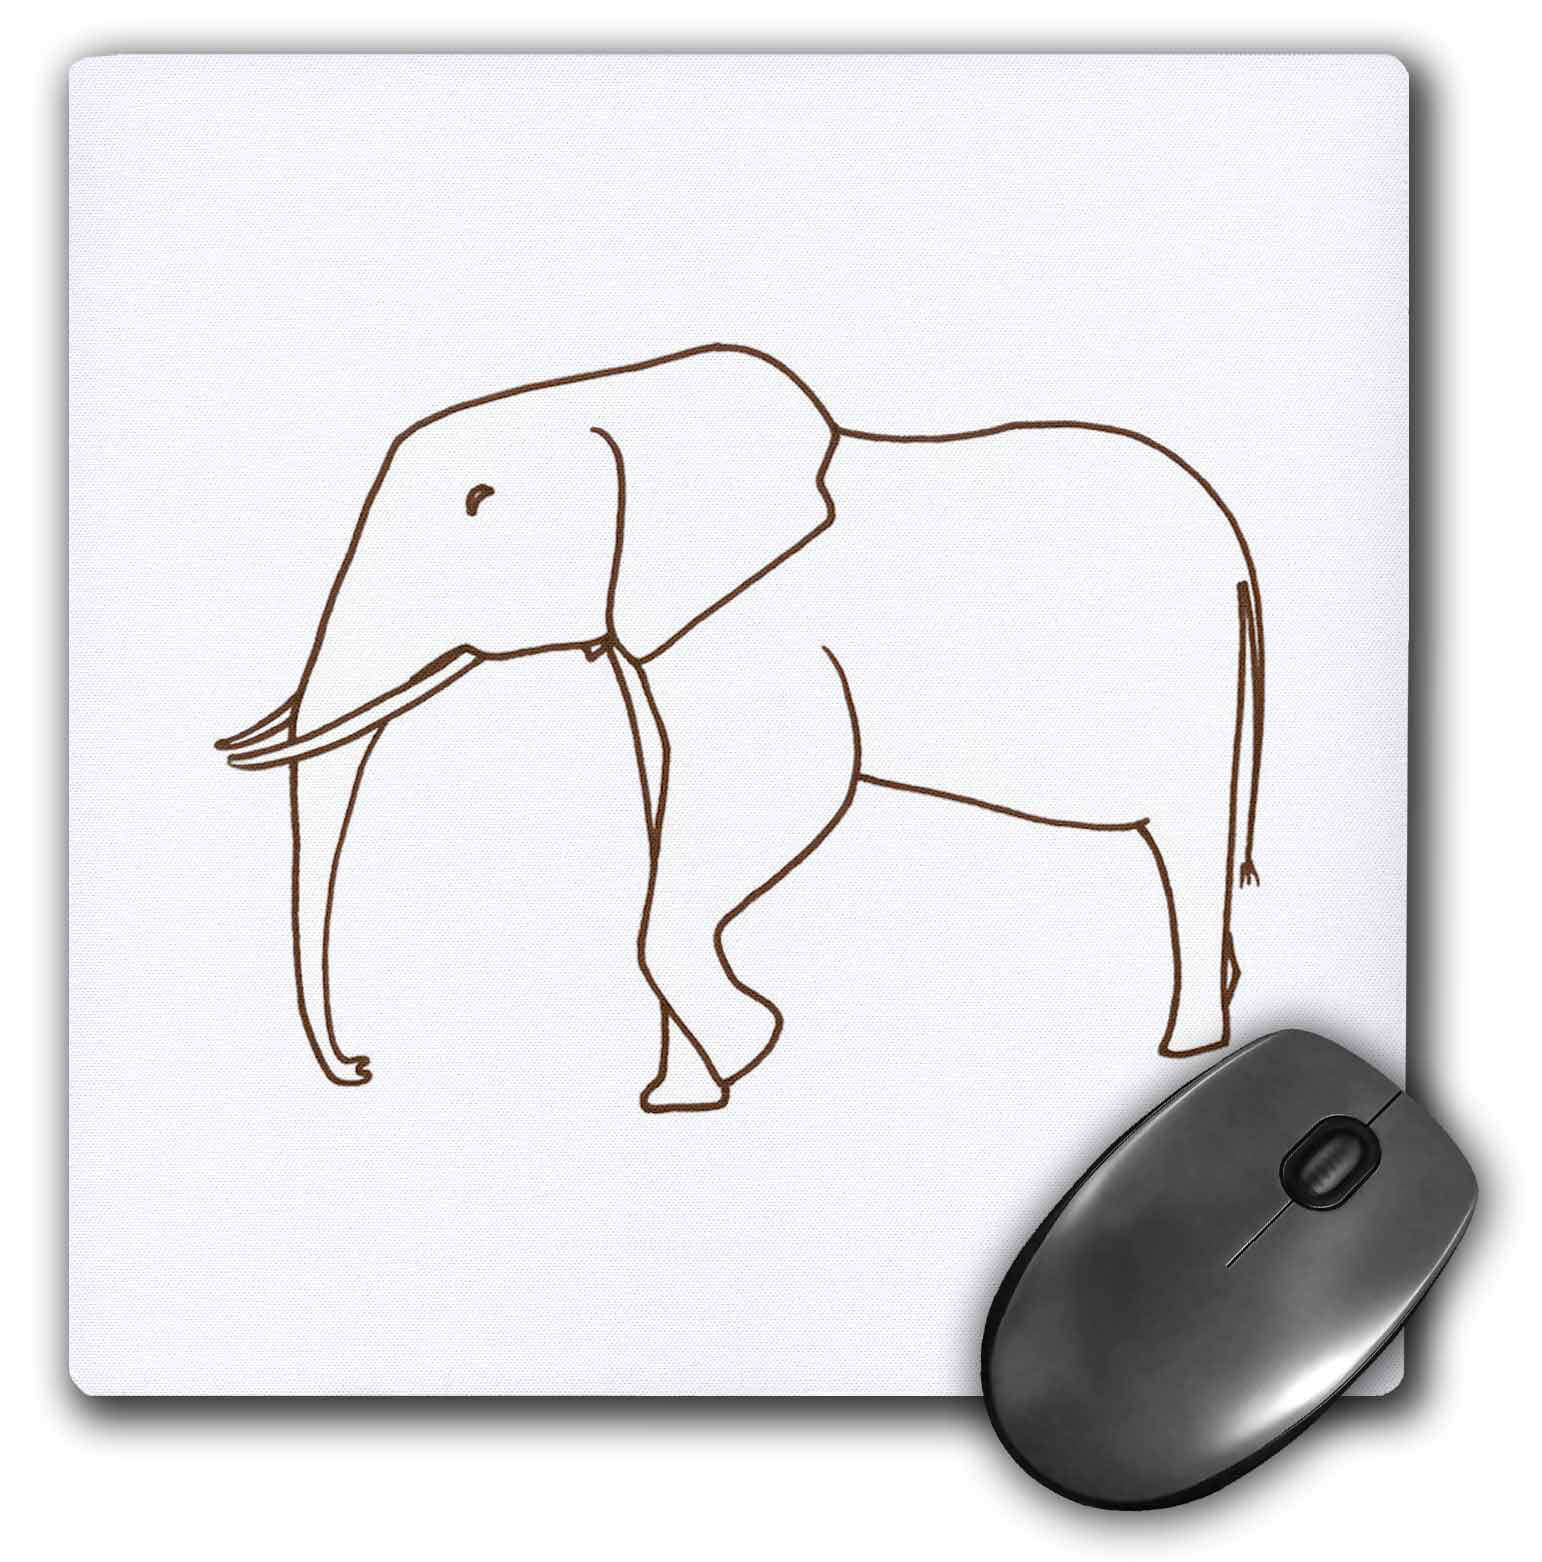 3dRose Elephant Walking Outline Art Drawing, Mouse Pad, 8